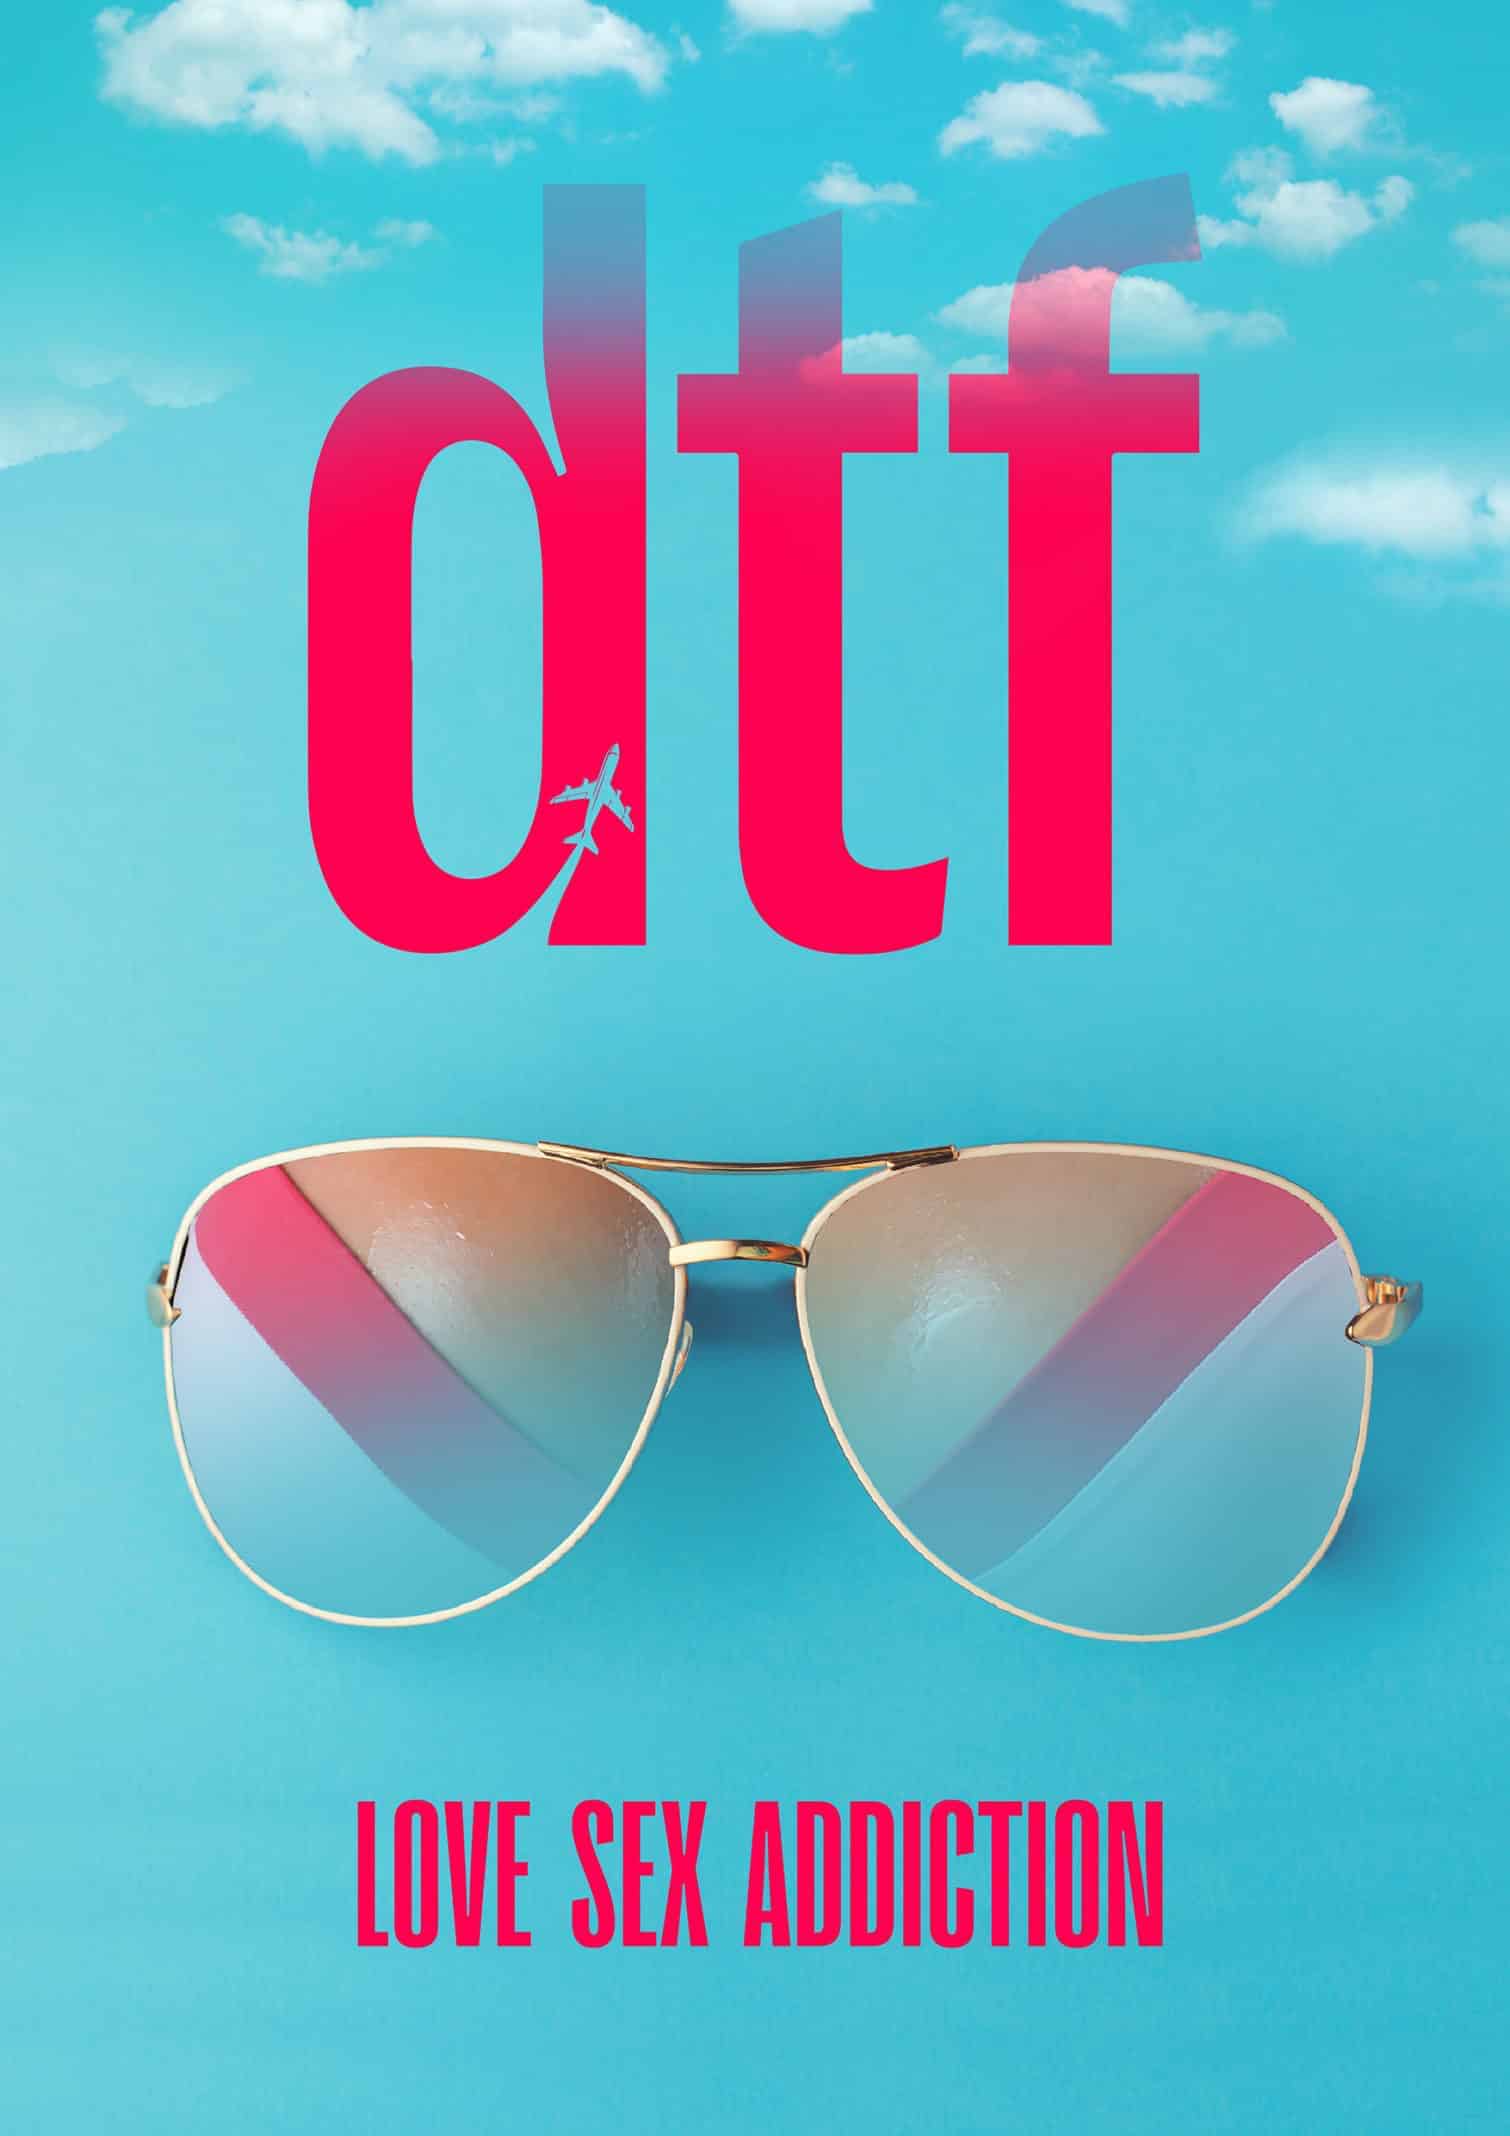 DTF Poster featuring aviator glasses.